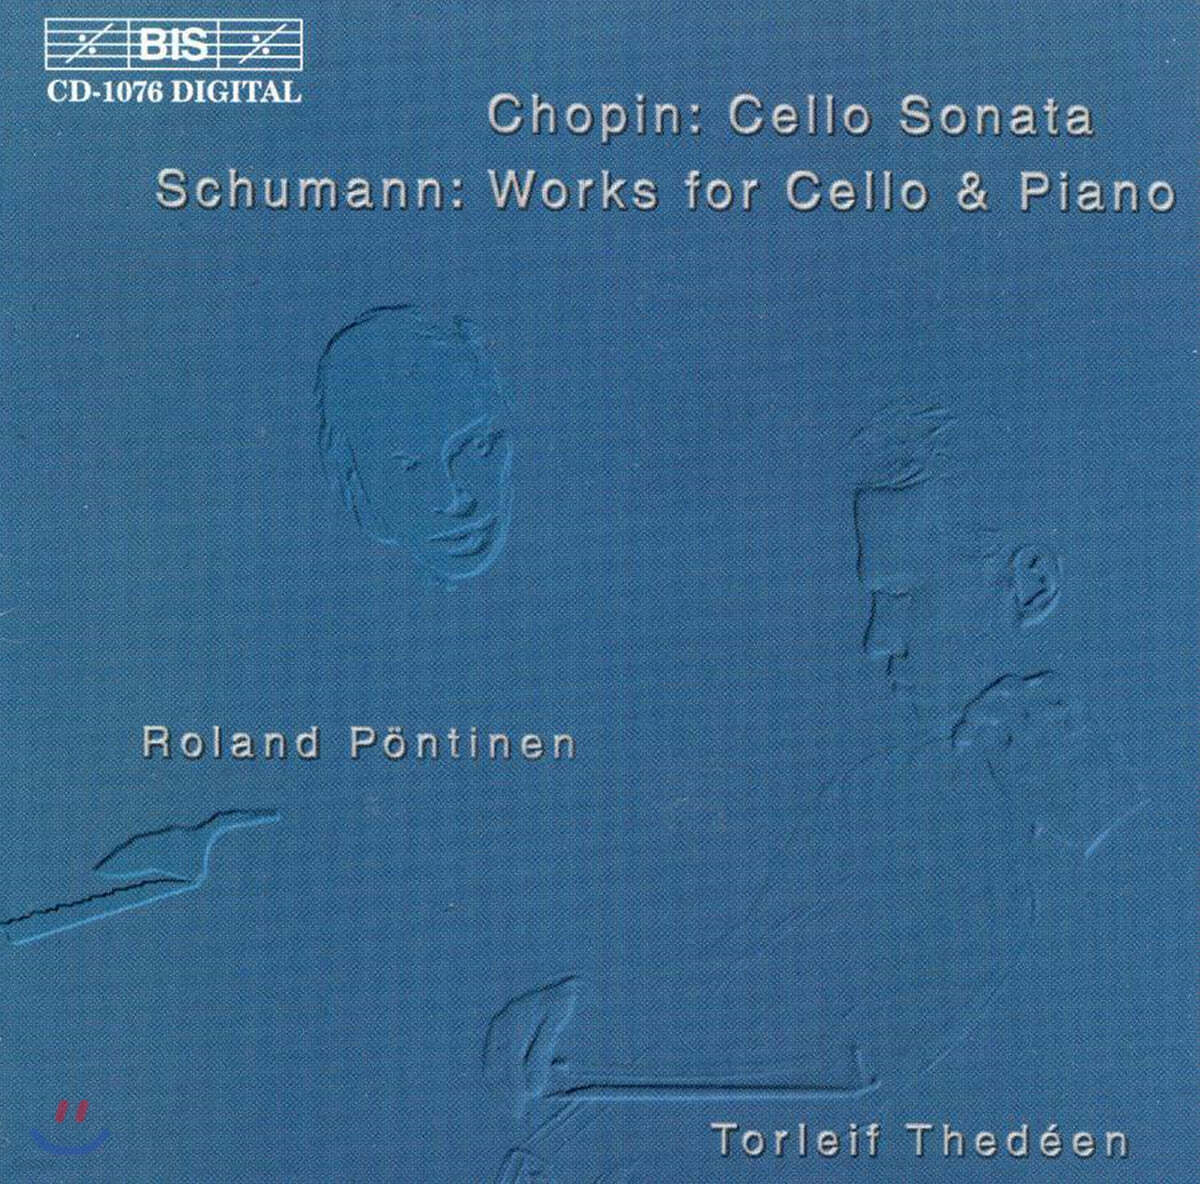 Torleif Thedeen / Roland Pontinen 쇼팽 / 슈만: 첼로와 피아노를 위한 작품들 (Chopin / Schumann: Works for Cello and Piano)